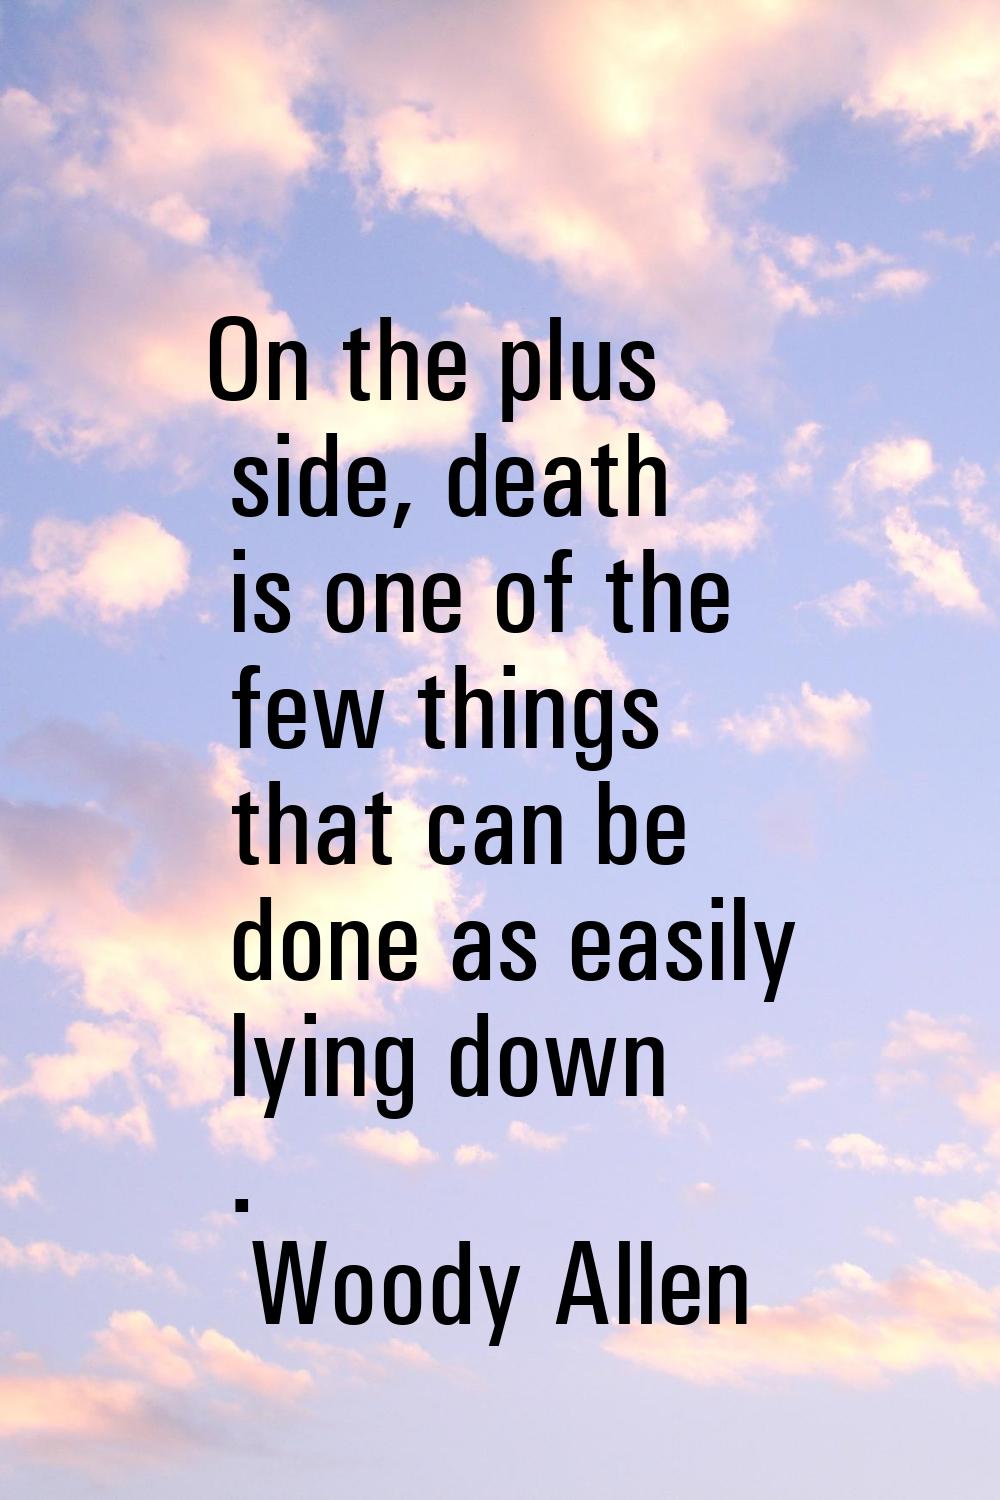 On the plus side, death is one of the few things that can be done as easily lying down .